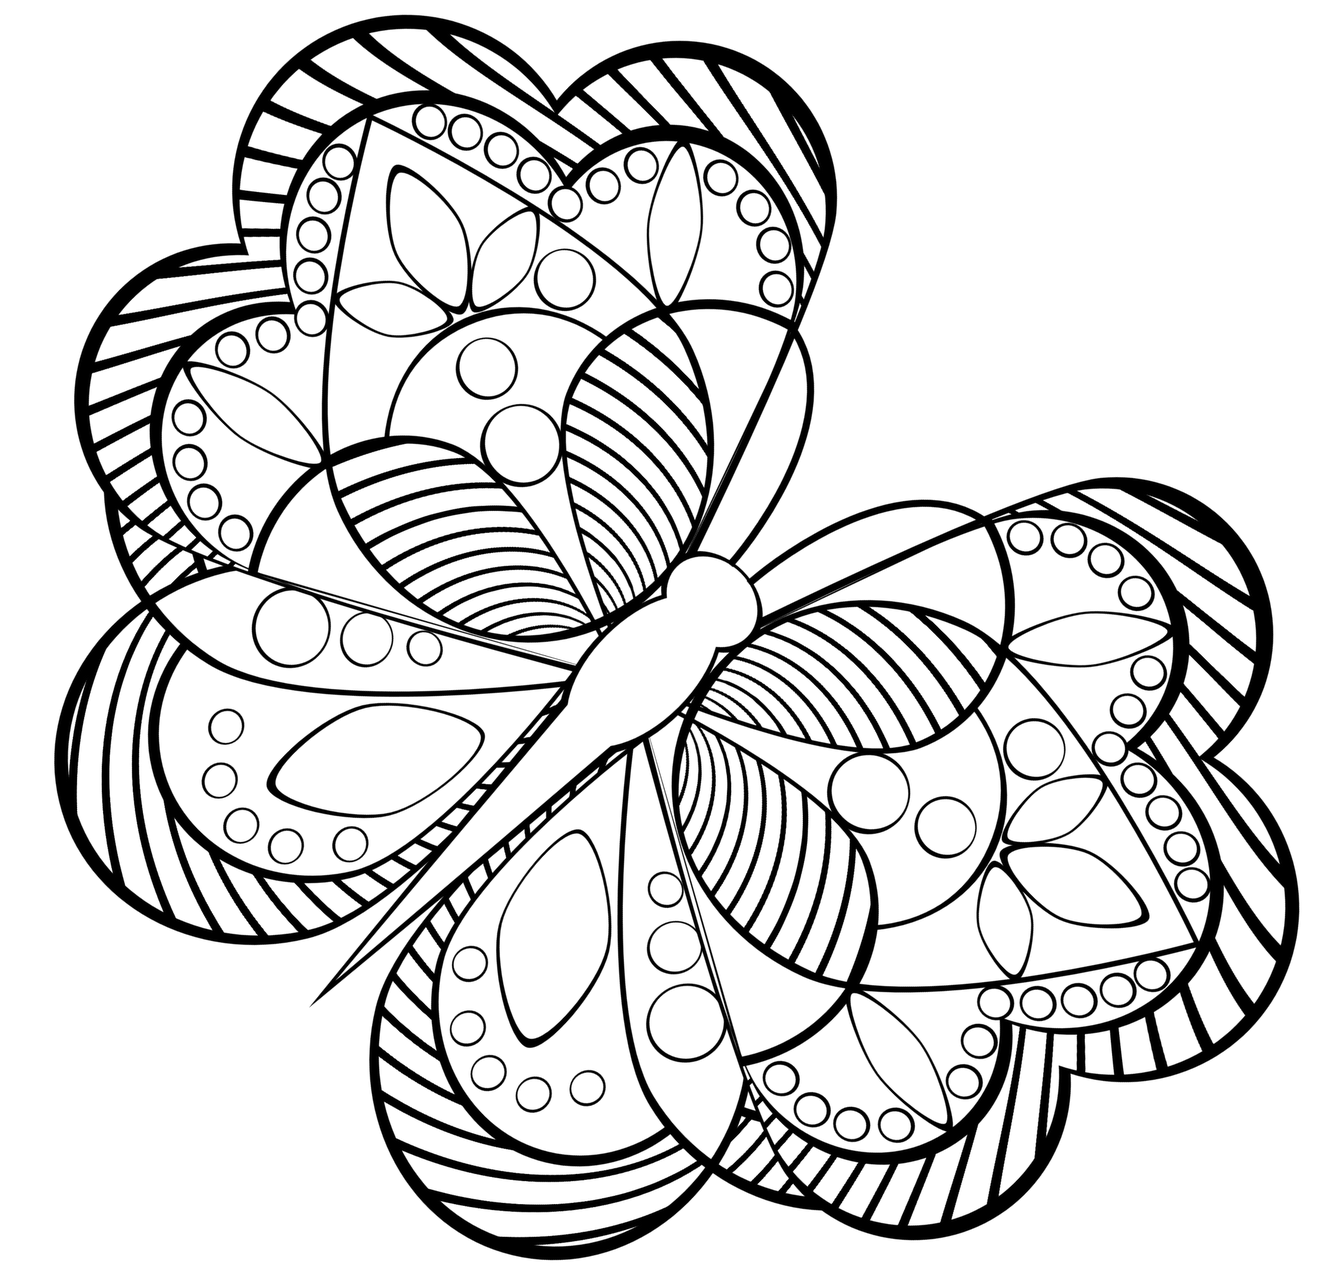 Printable S For Adults - Coloring Pages for Kids and for Adults